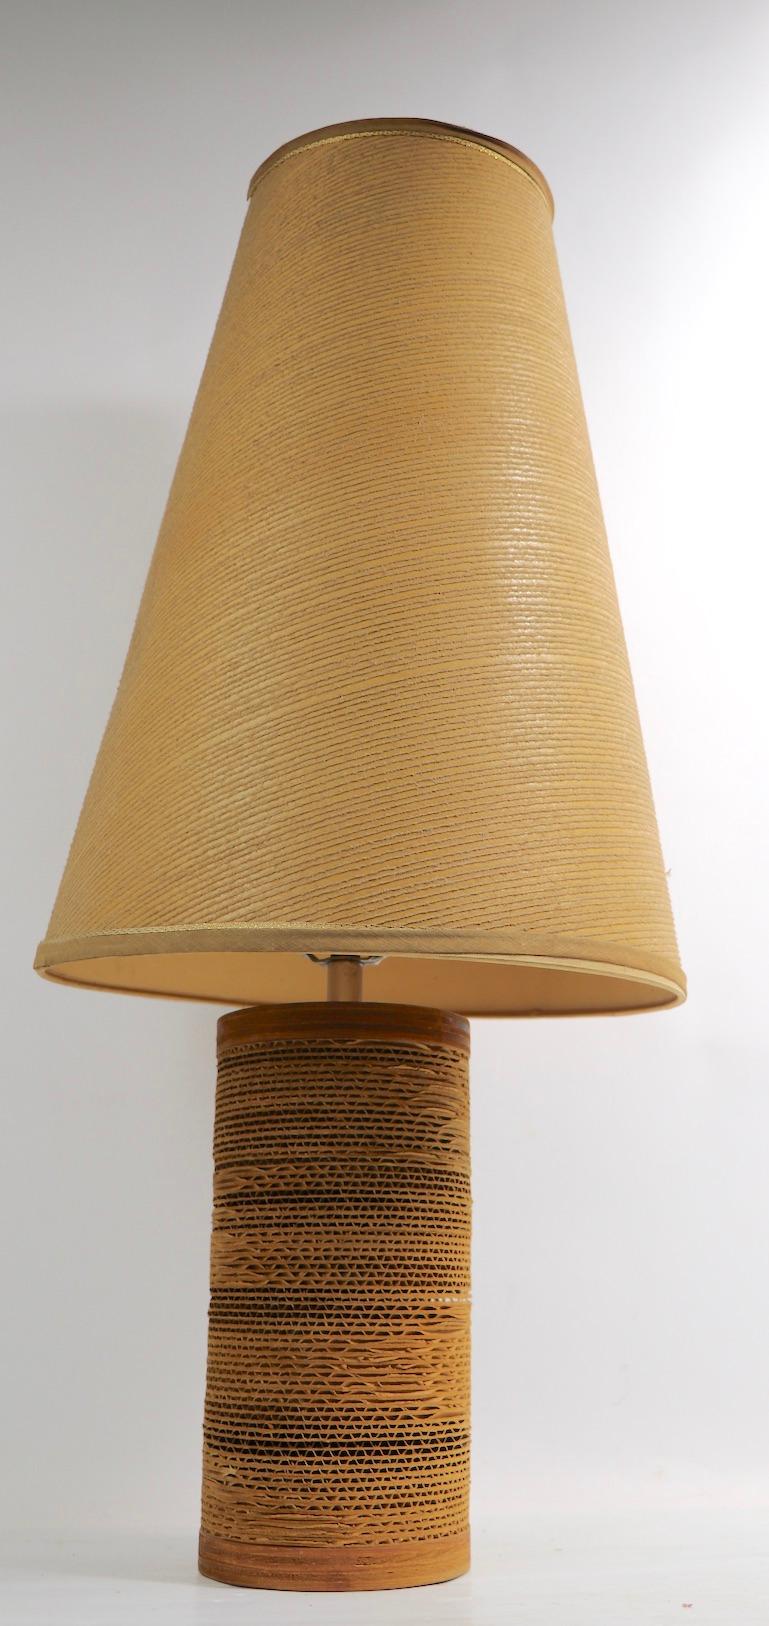 Nice cardboard, wood and chrome table lamp by Gregory Van Pelt, with original conical swirl pattern shade. This example is in very good, original clean, and working condition. Lamp base 5 in diameter x 10.5 height to top of body x 30 in H inc shade.